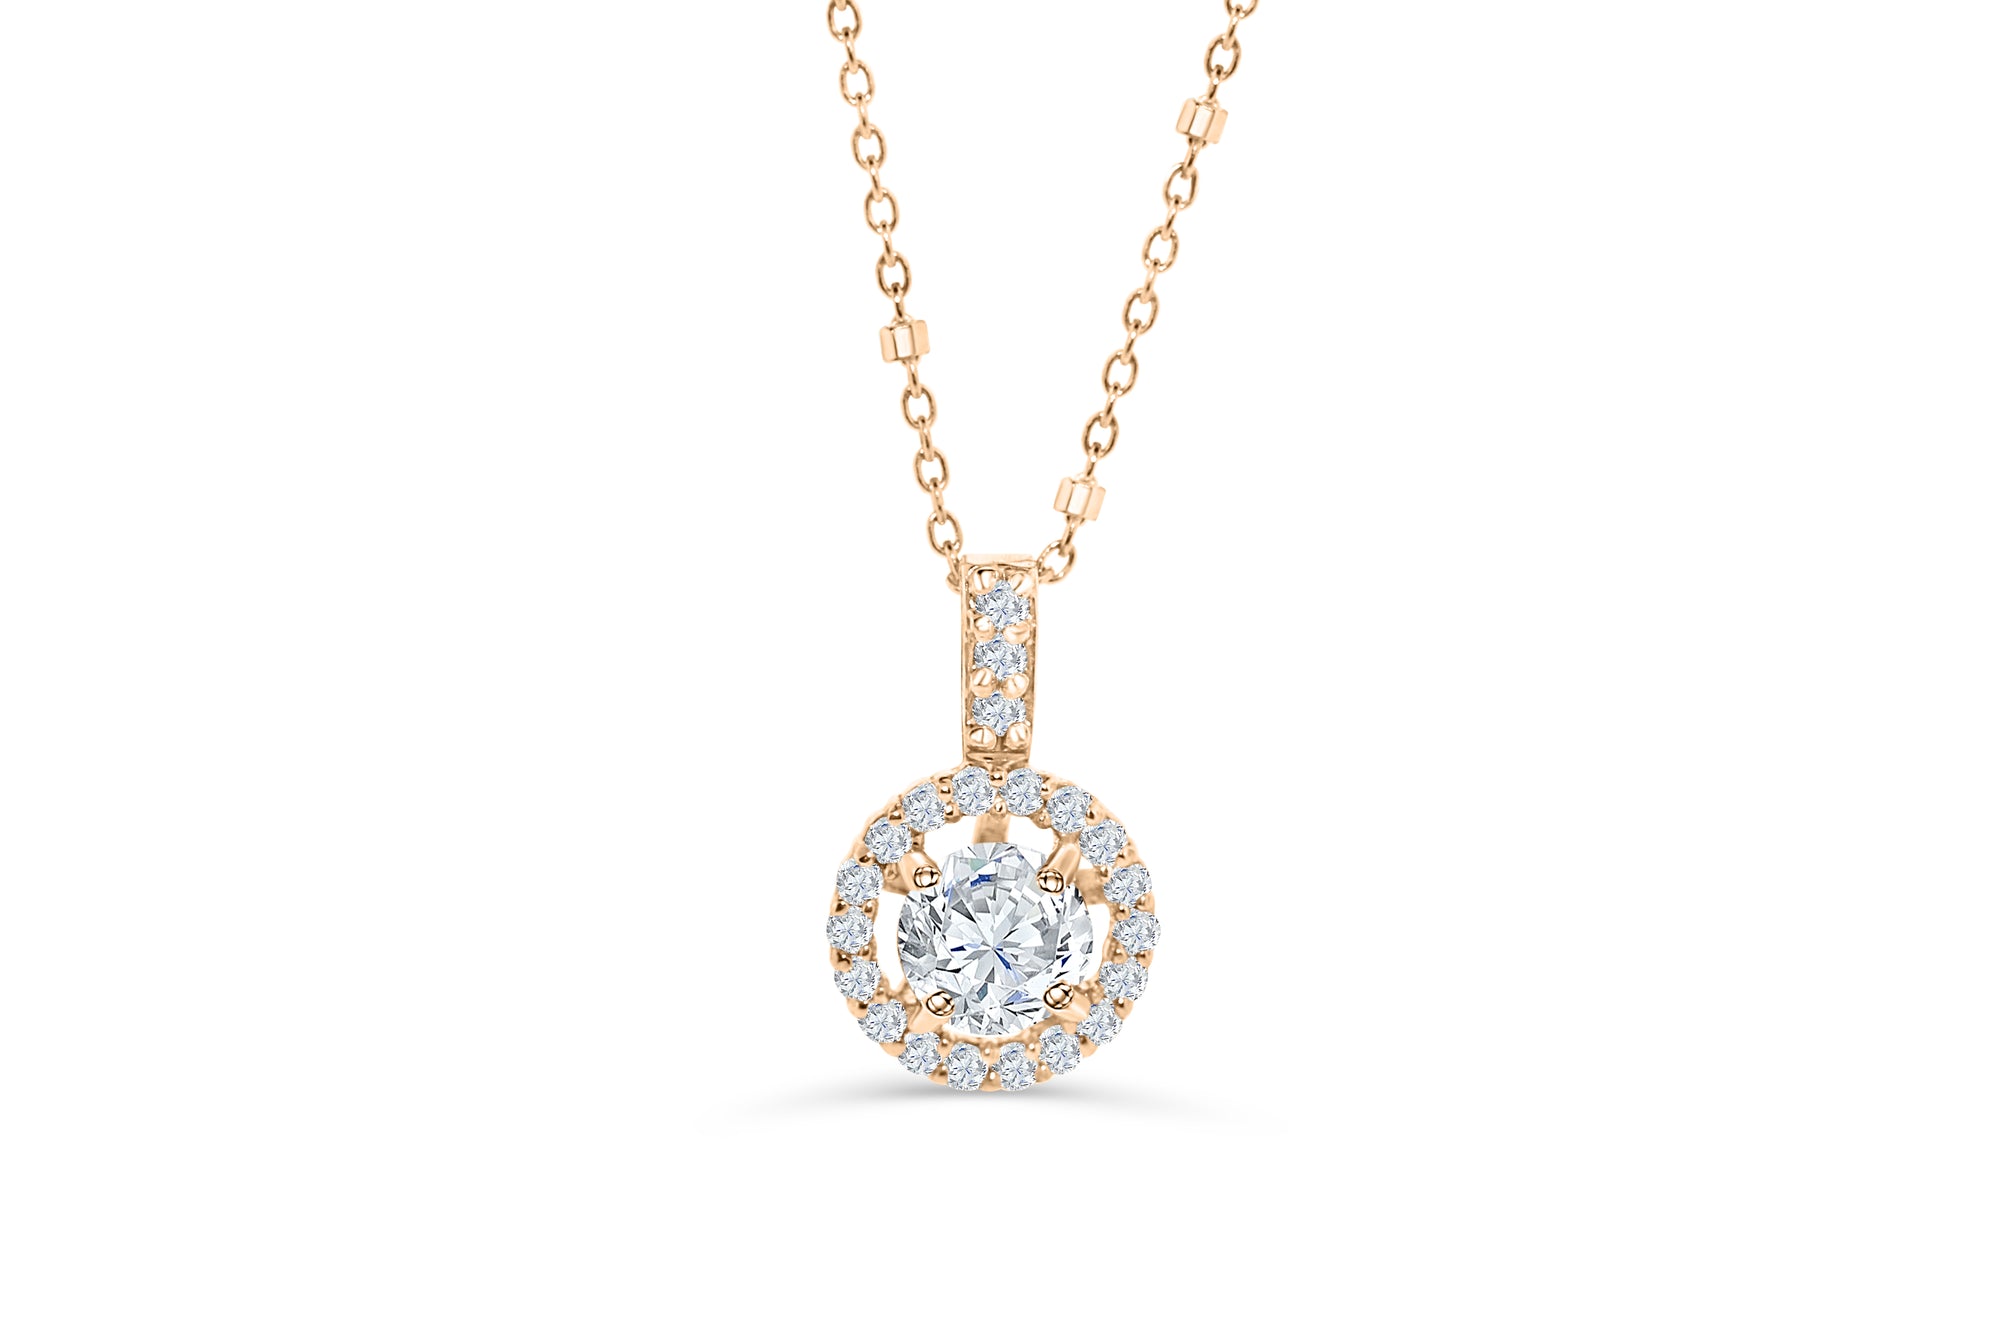 Halo Solitaire Diamond Pendant 0.64 CT TW 14K Rose Gold DPEN035 - NorthandSouthJewelry